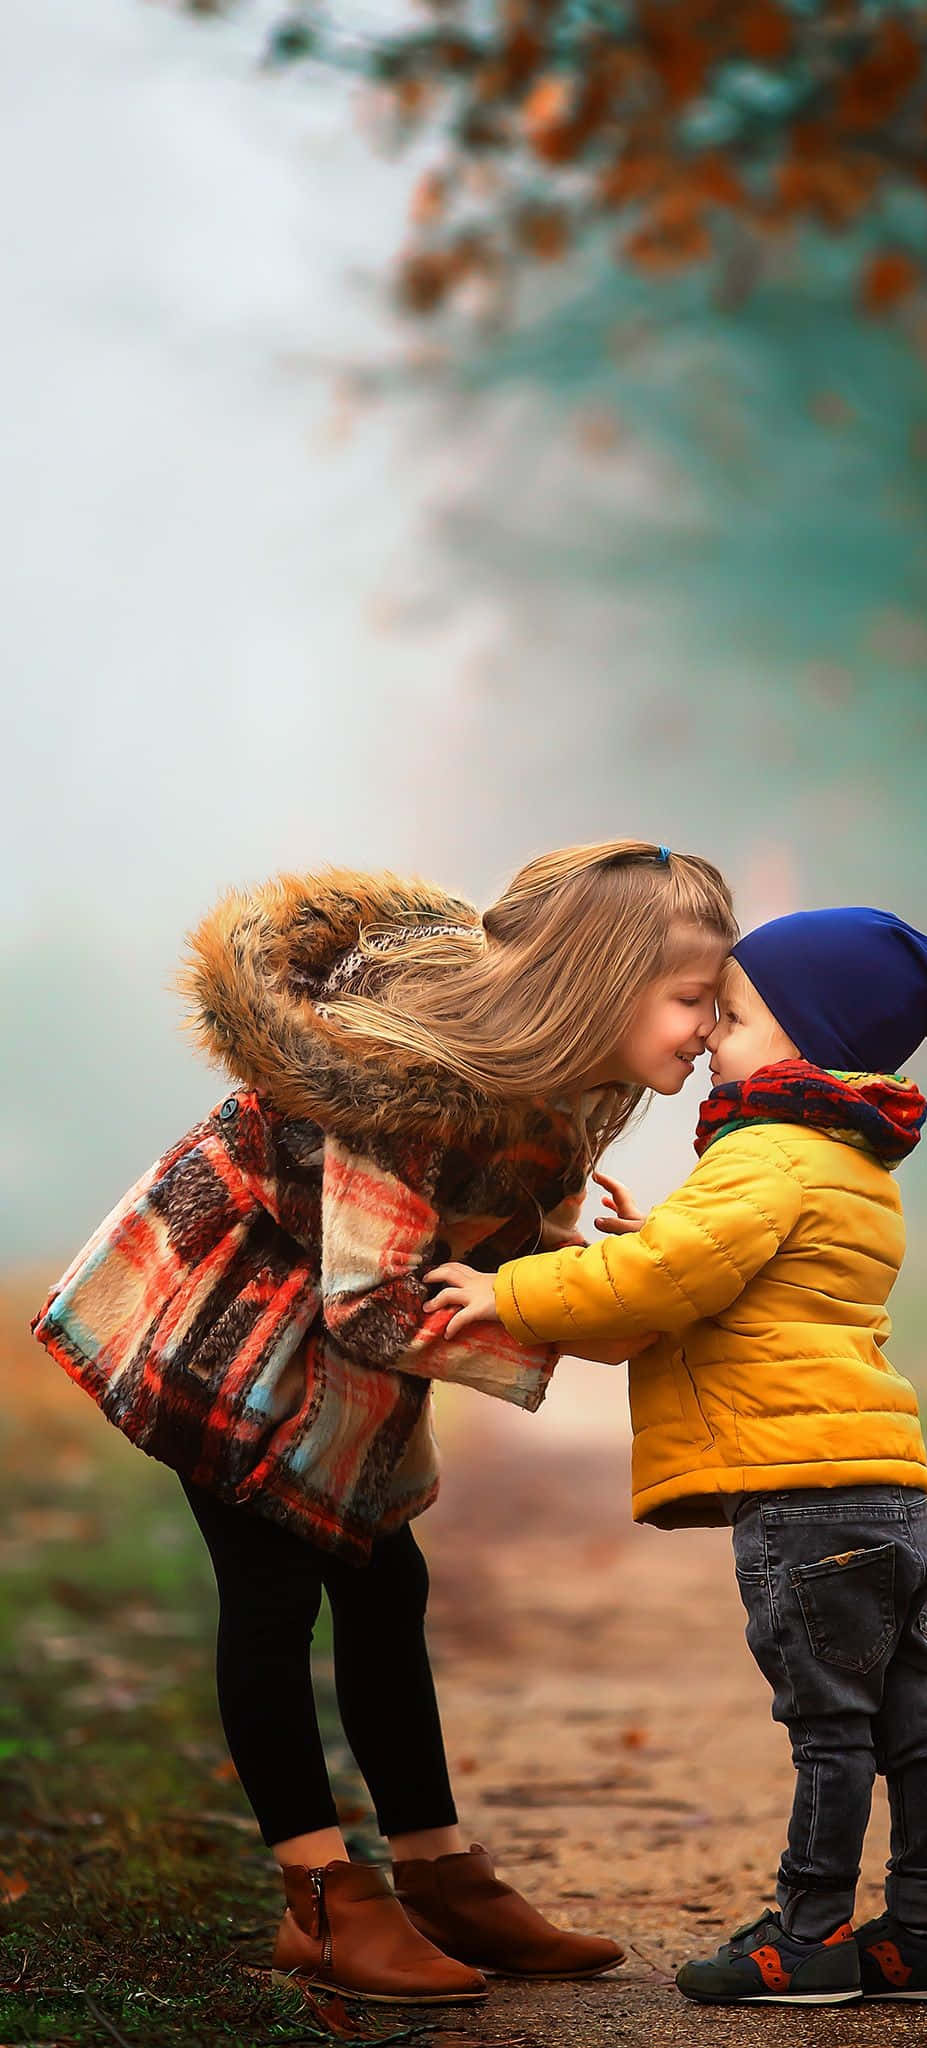 Download A Boy And Girl Kissing In The Autumn | Wallpapers.com